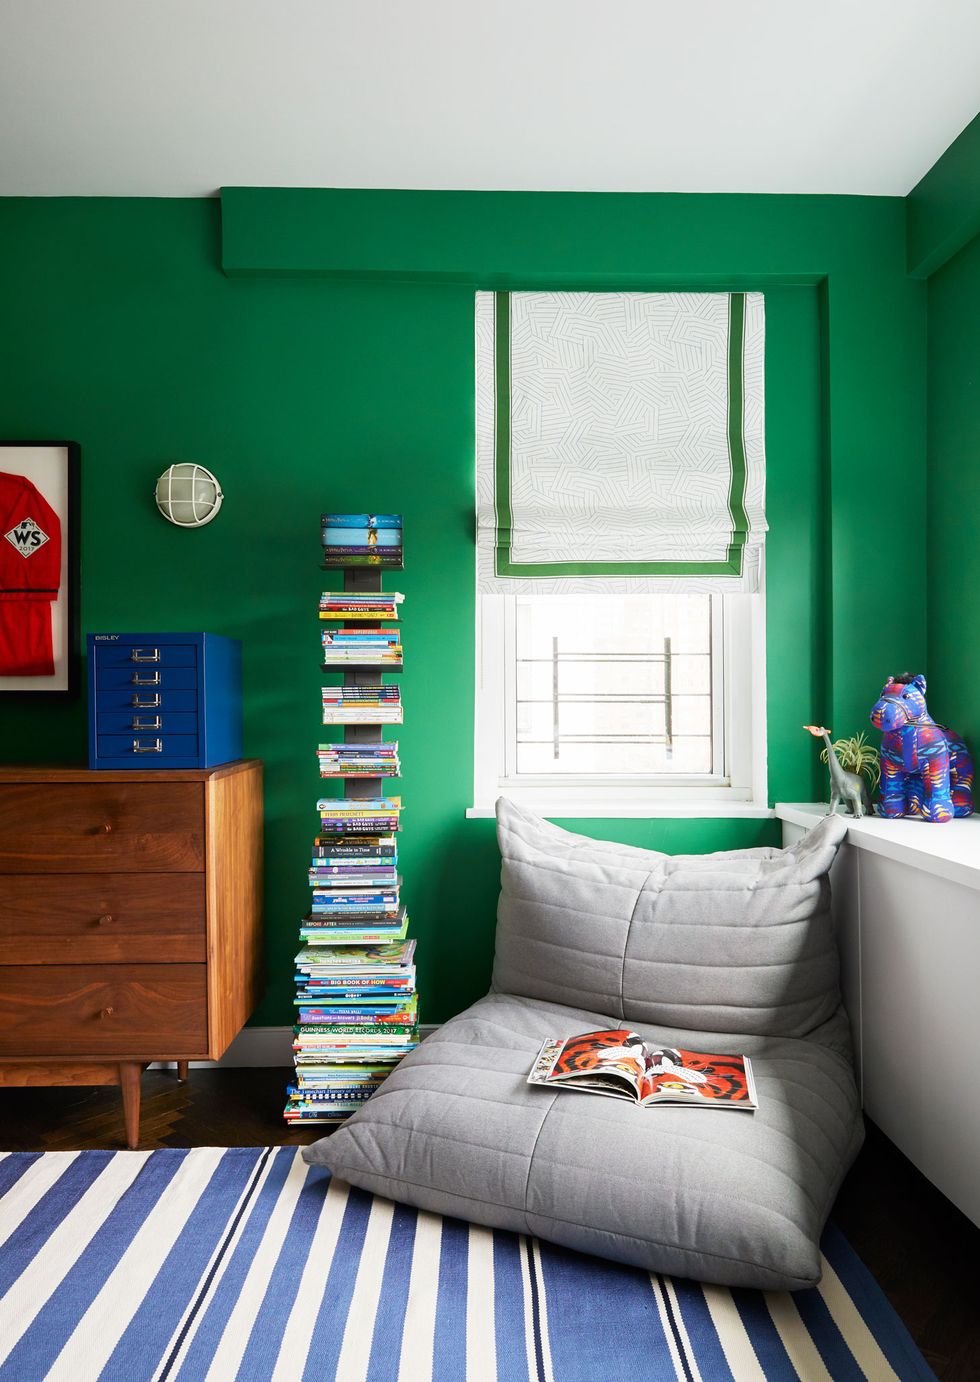 Blue, Room, Green, Furniture, Interior design, Turquoise, Bedroom, Red, Wall, Bed sheet, 